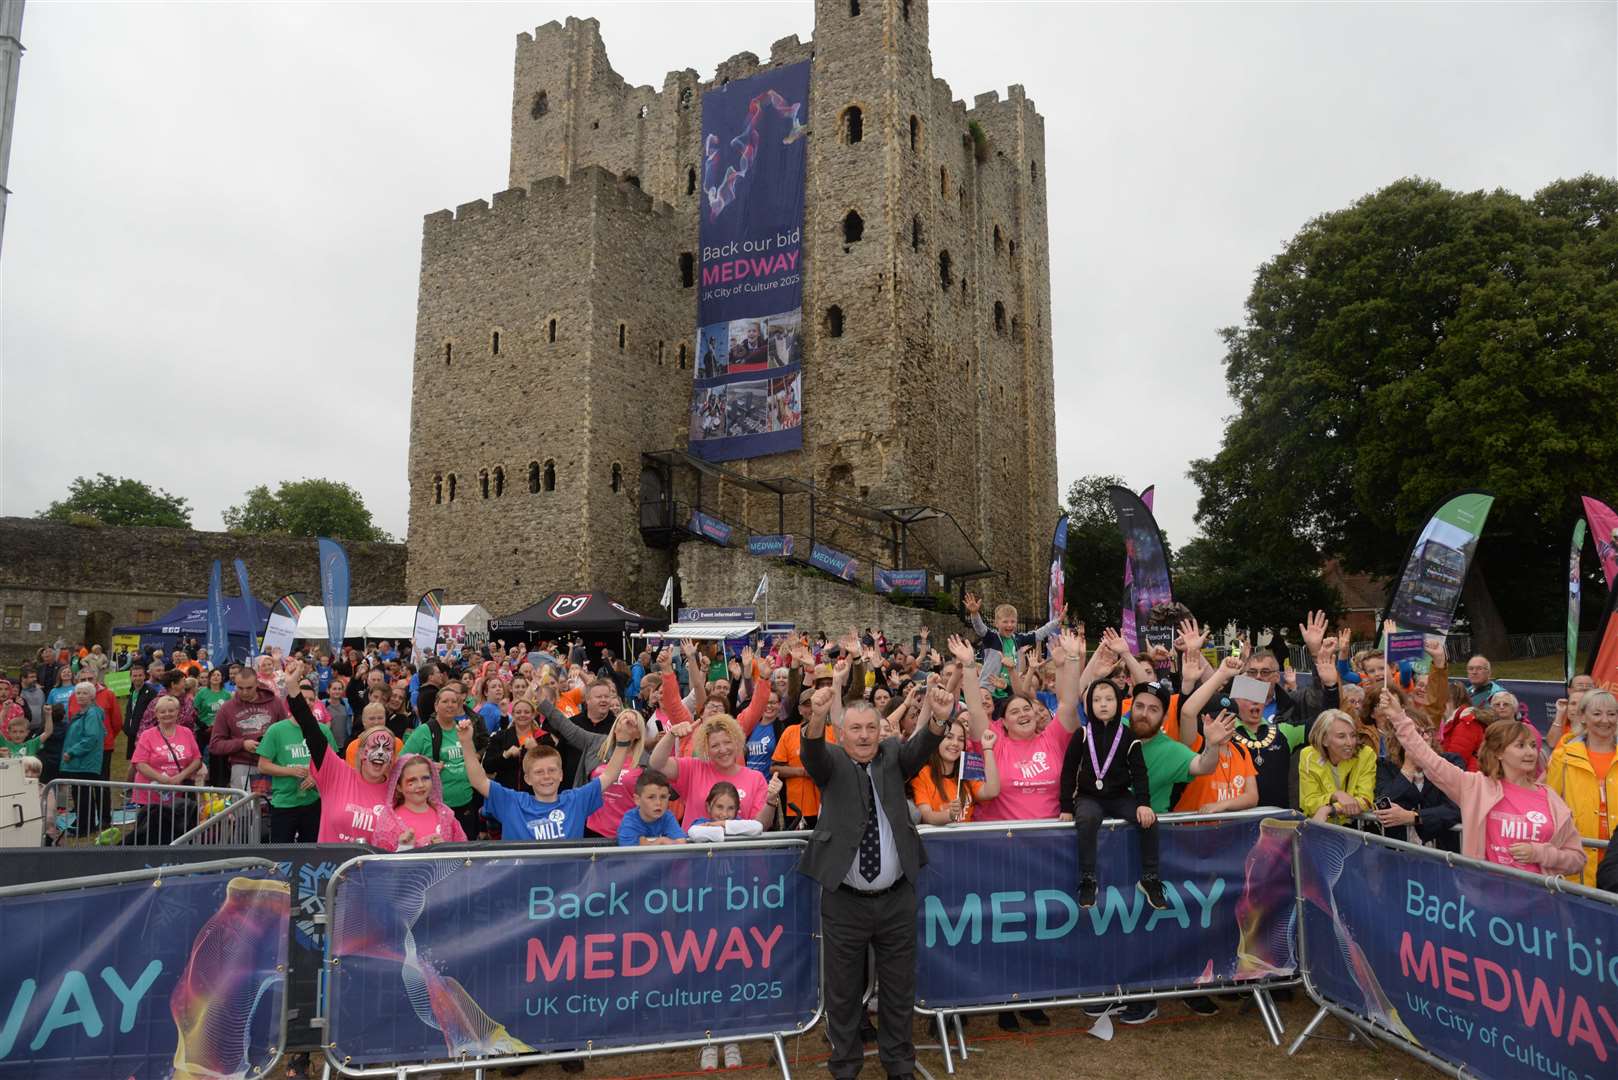 Council leader Cllr Alan Jarrett announced Medway's bid to be the UK City of Culture at the Medway Mile event at Rochester Castle in July last year